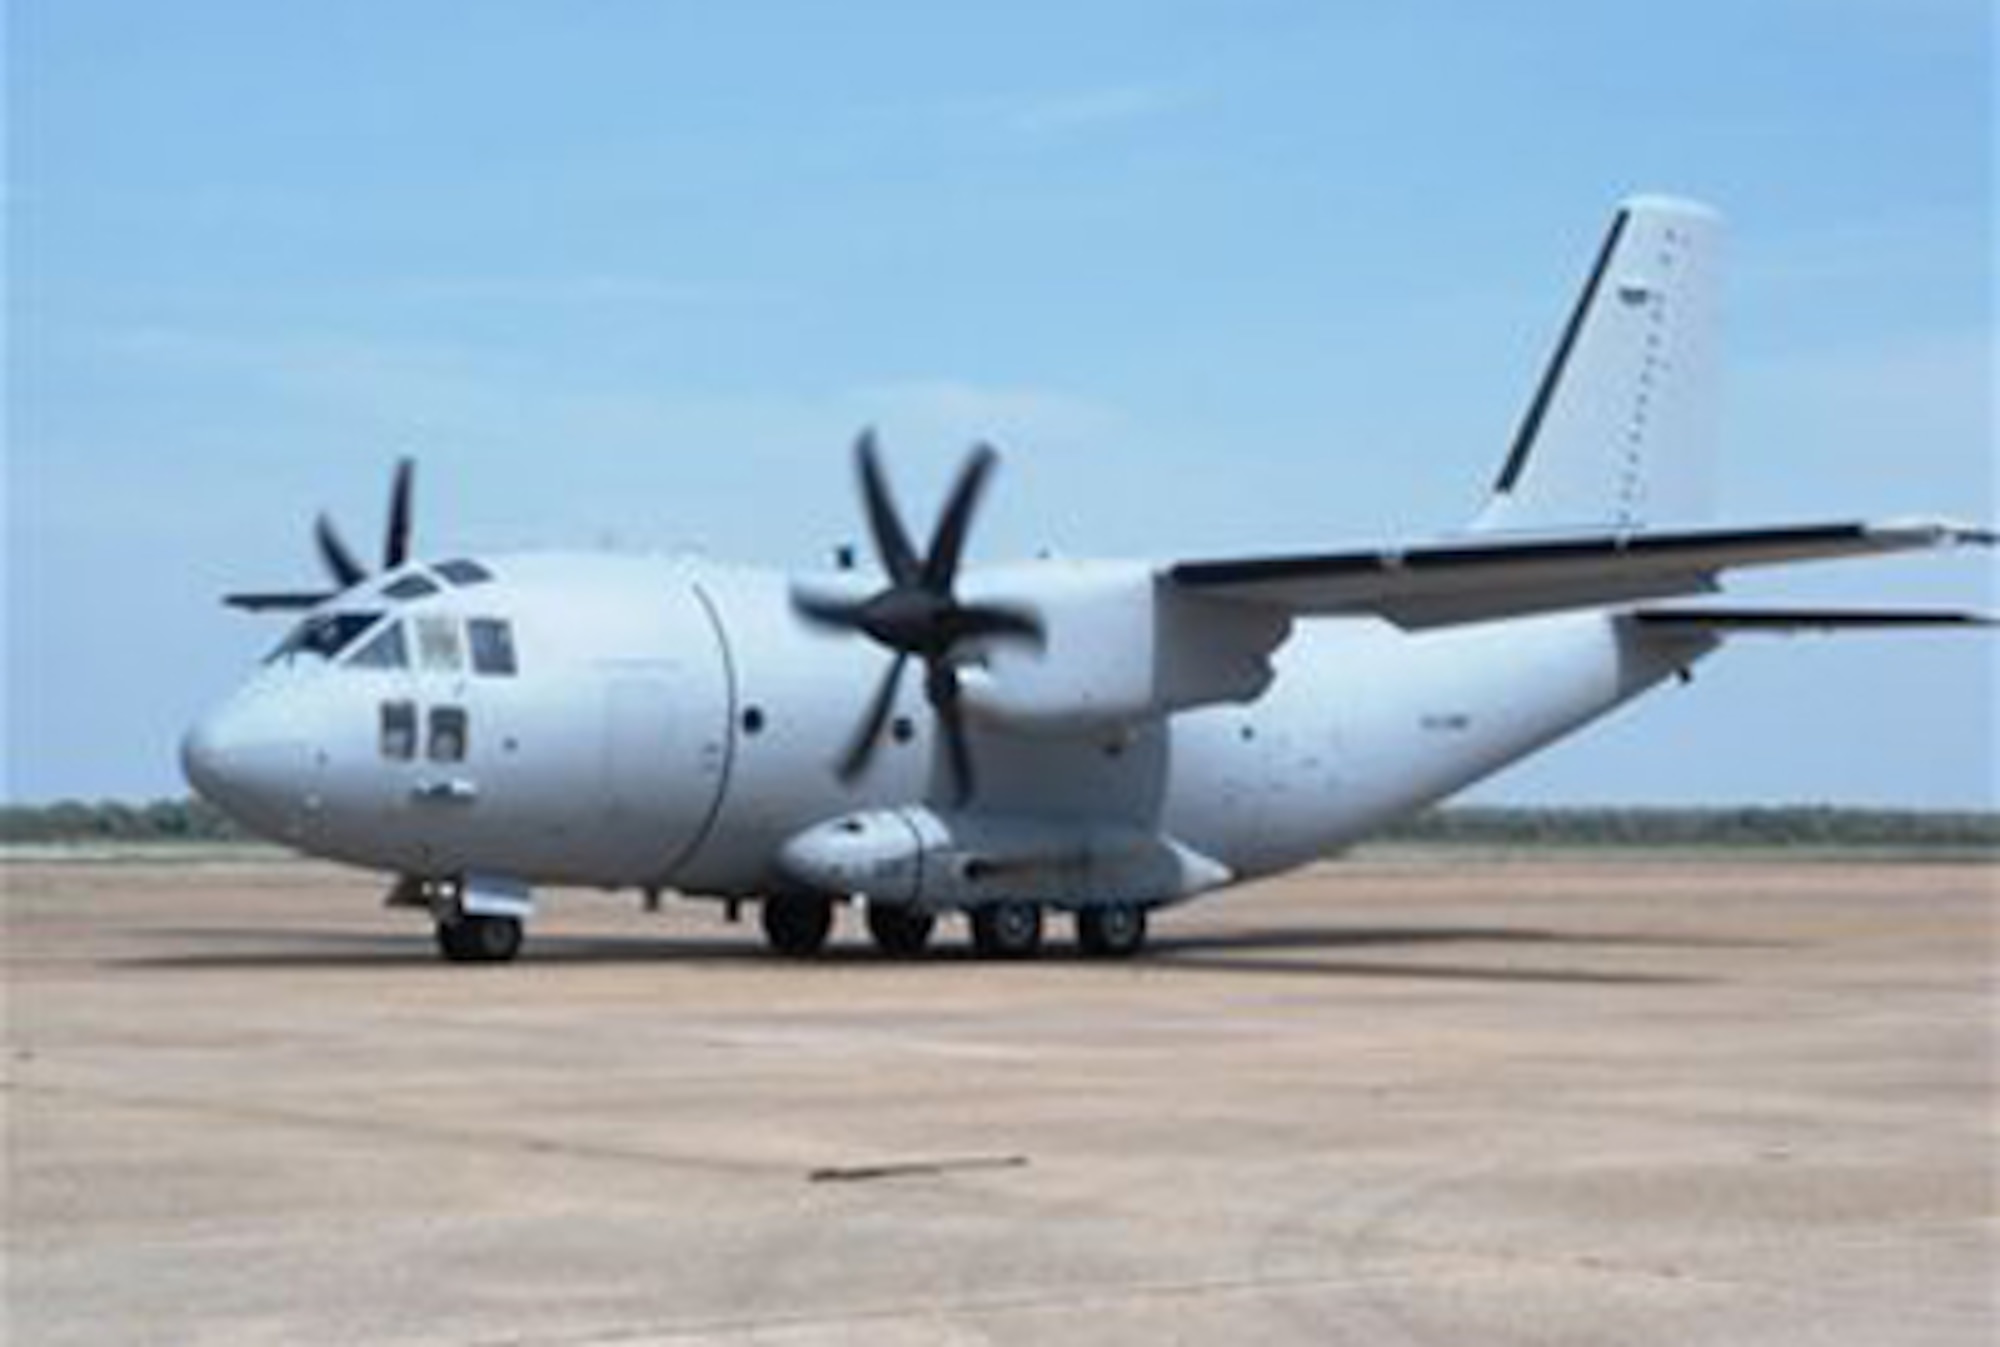 The C-27J Spartan is a twin turboprop aircraft with a short takeoff-and-landing capability that will provide access to airstrips otherwise unreachable by fixed-wing aircraft. (U.S. Air Force photo)